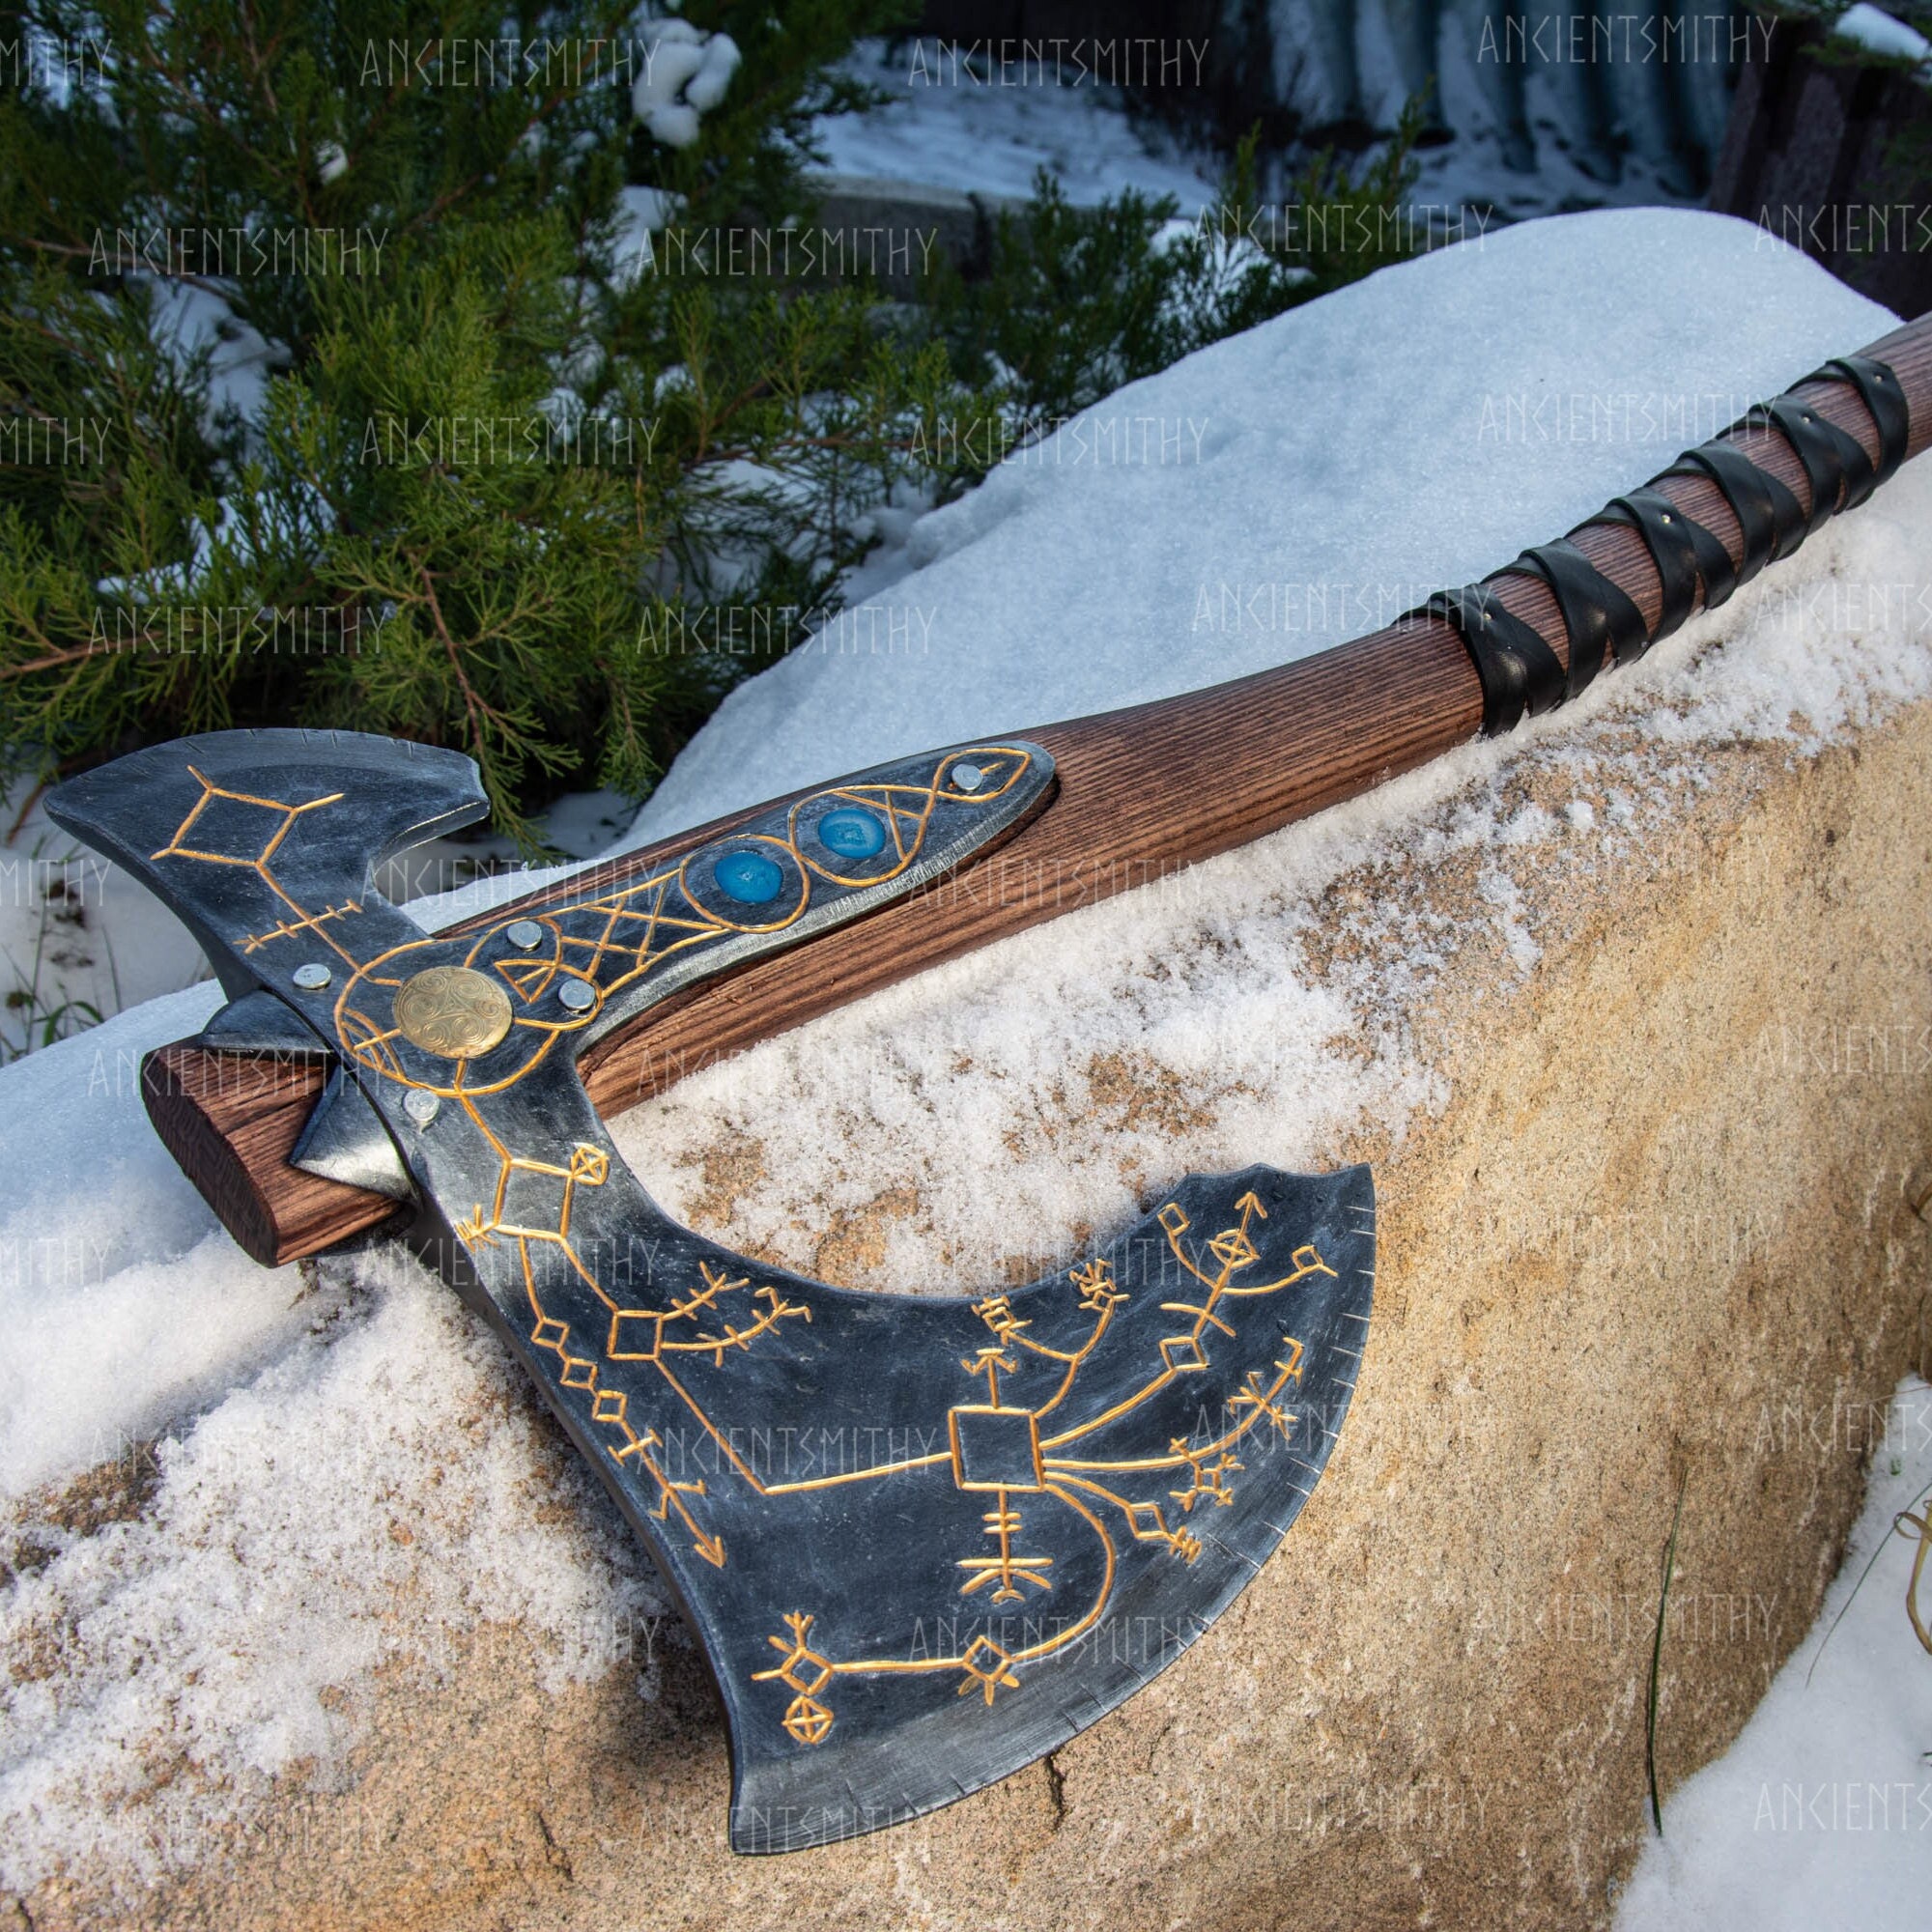 If Time Travel allowed our current Kratos, with his Leviathan Axe